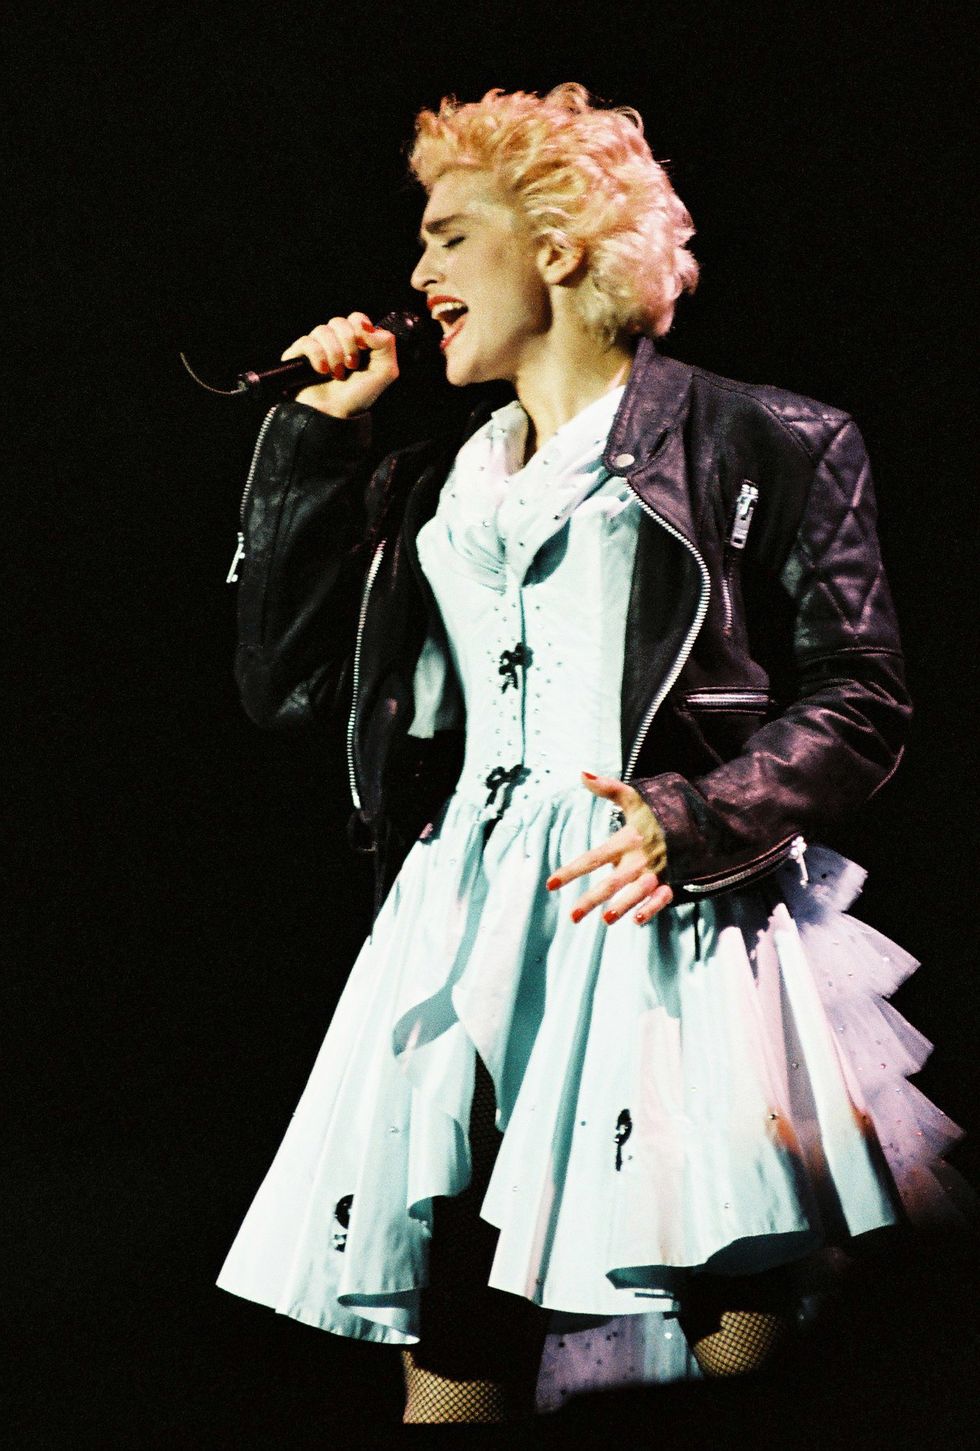 madonna performs at wembley stadium in 1987